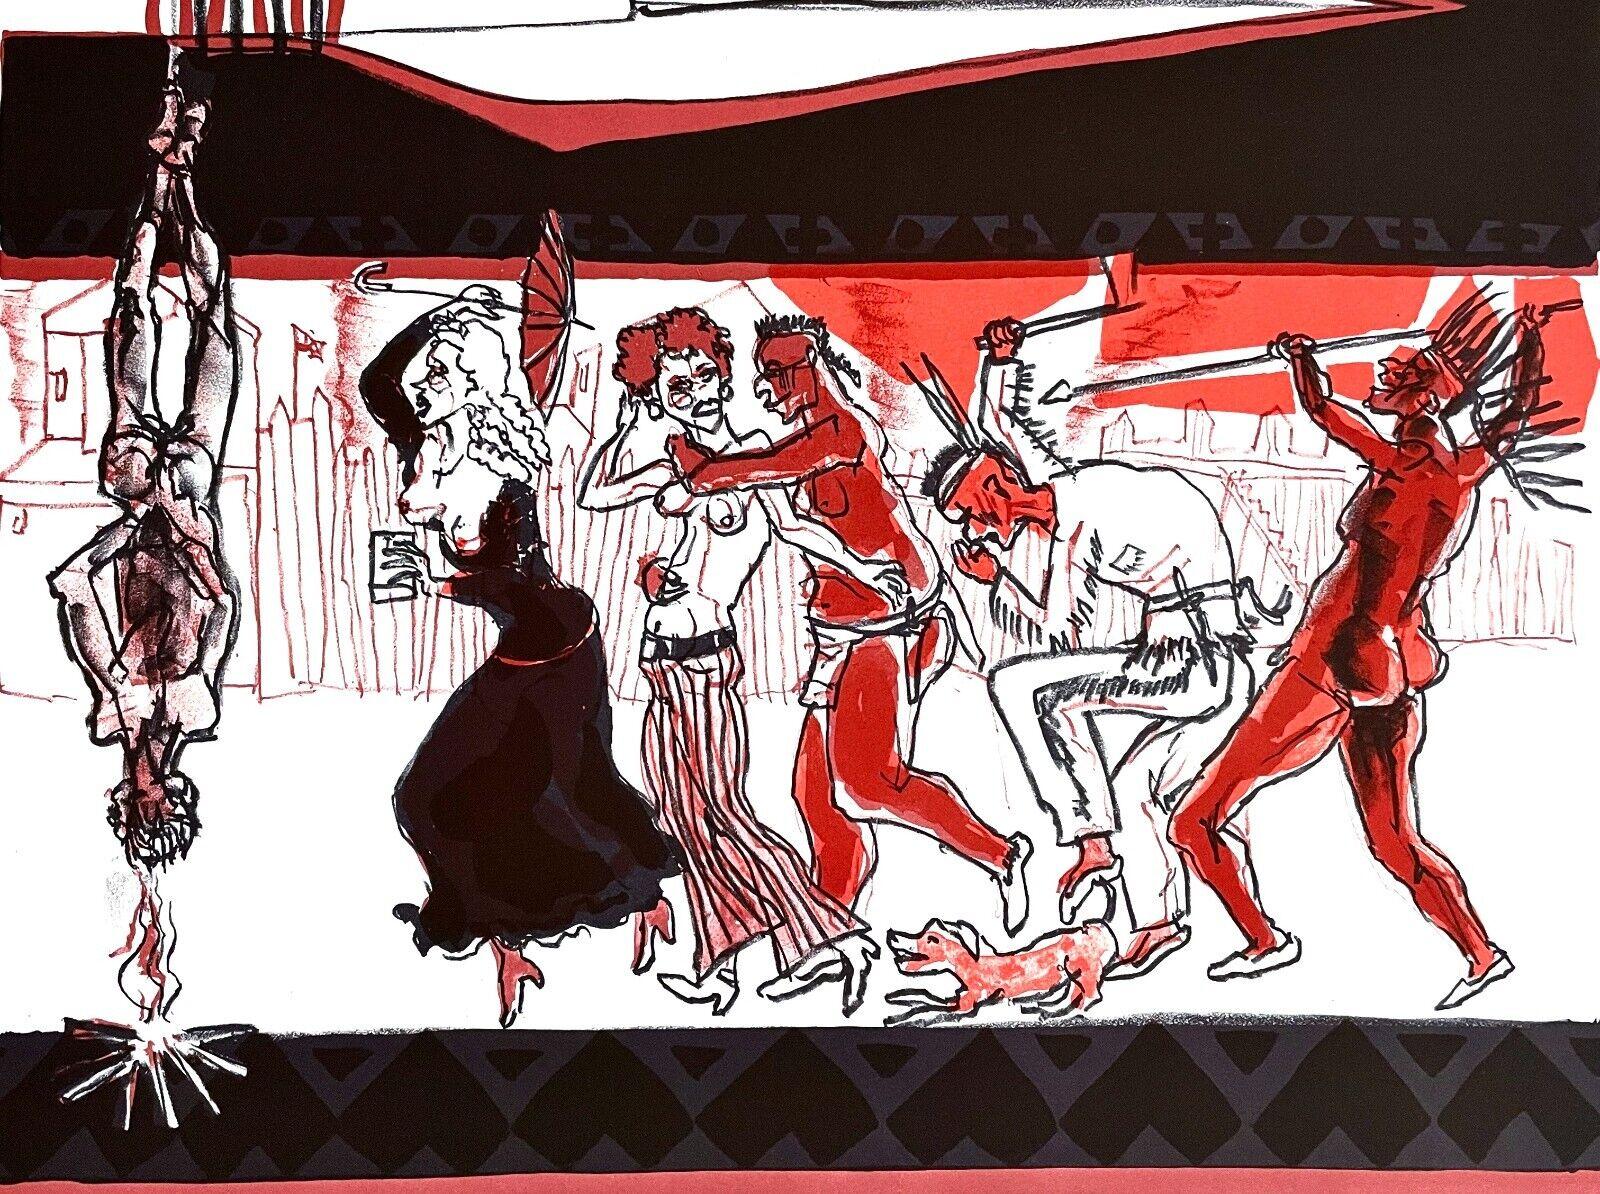 WARREN COLESCOTT (1921-2018) An American artist best known for his satirical Etchings. Working in that area which he calls that black zone between tragedy and high comedy, where with a little pull or push one way or the other you can transmute